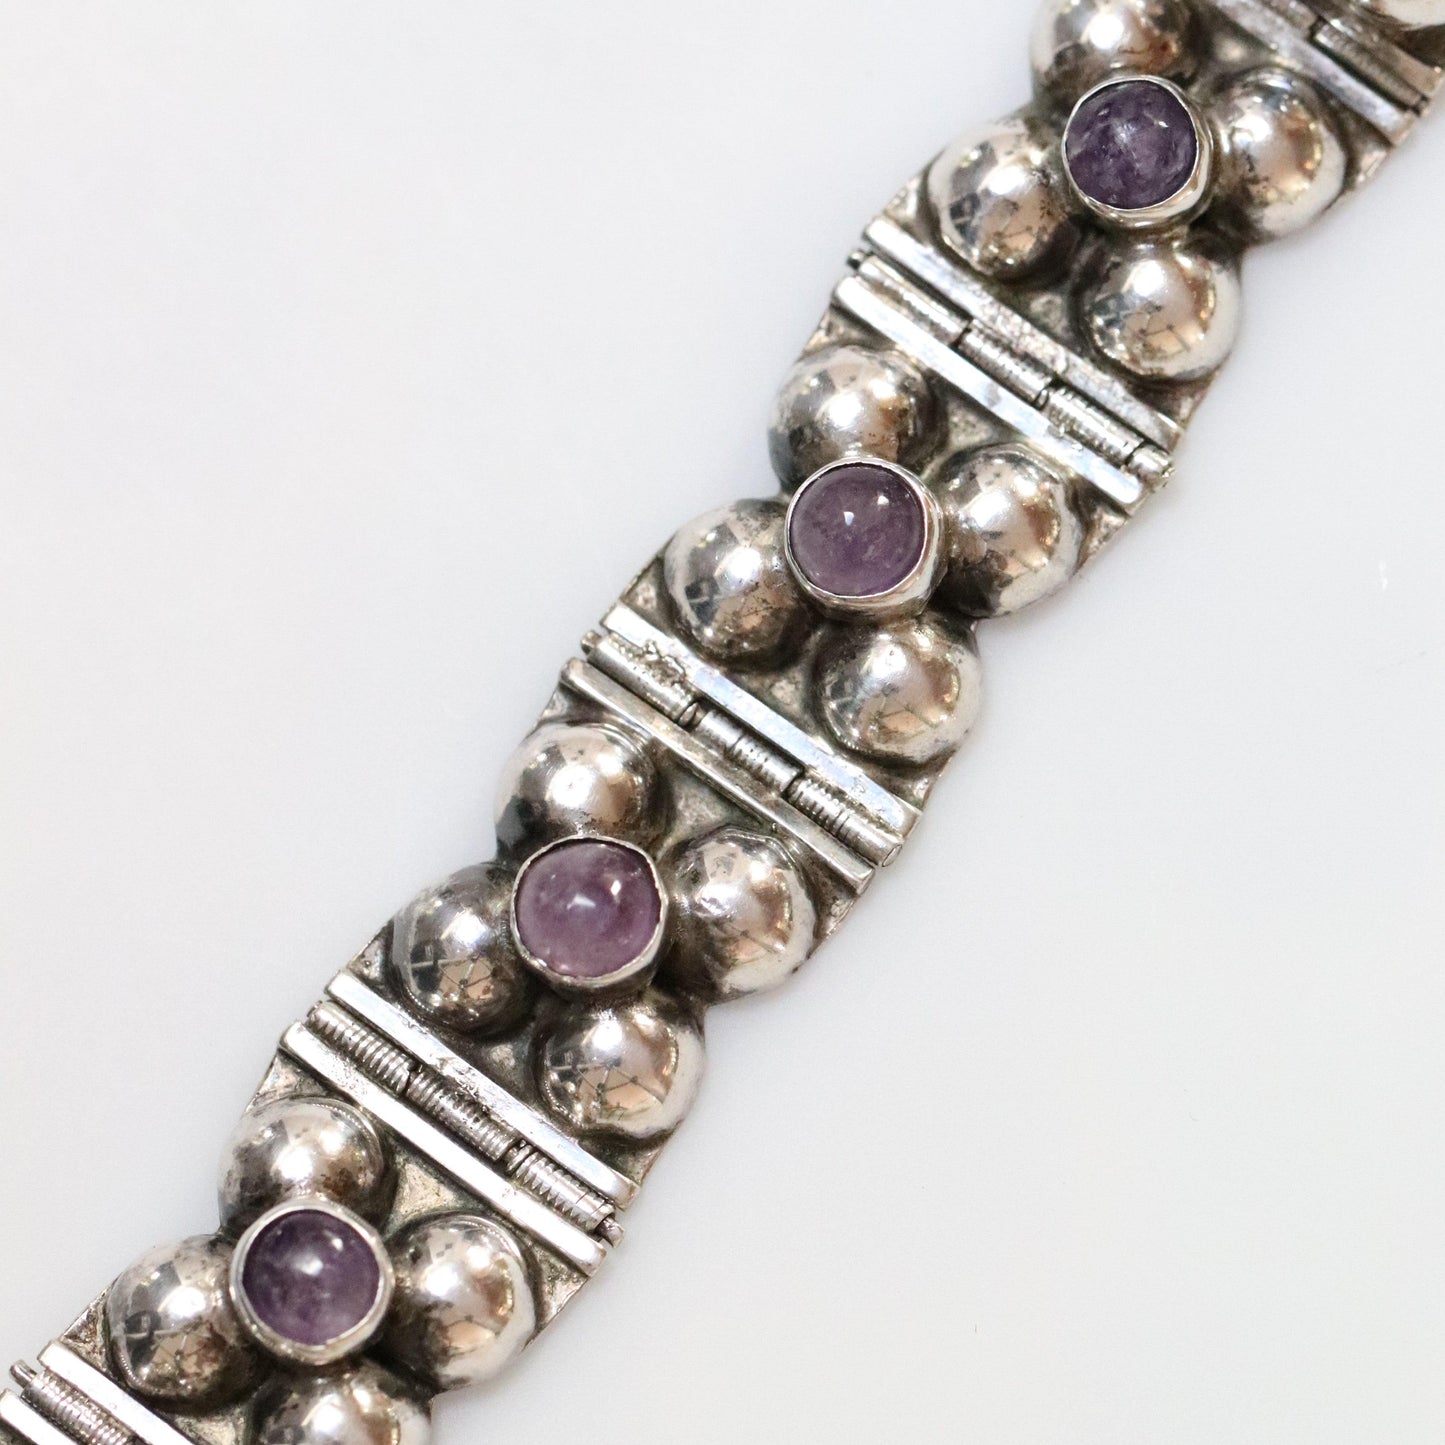 Vintage Silver Mexican Jewelry | Early Handcrafted Floral Amethyst Bracelet - Carmel Fine Silver Jewelry